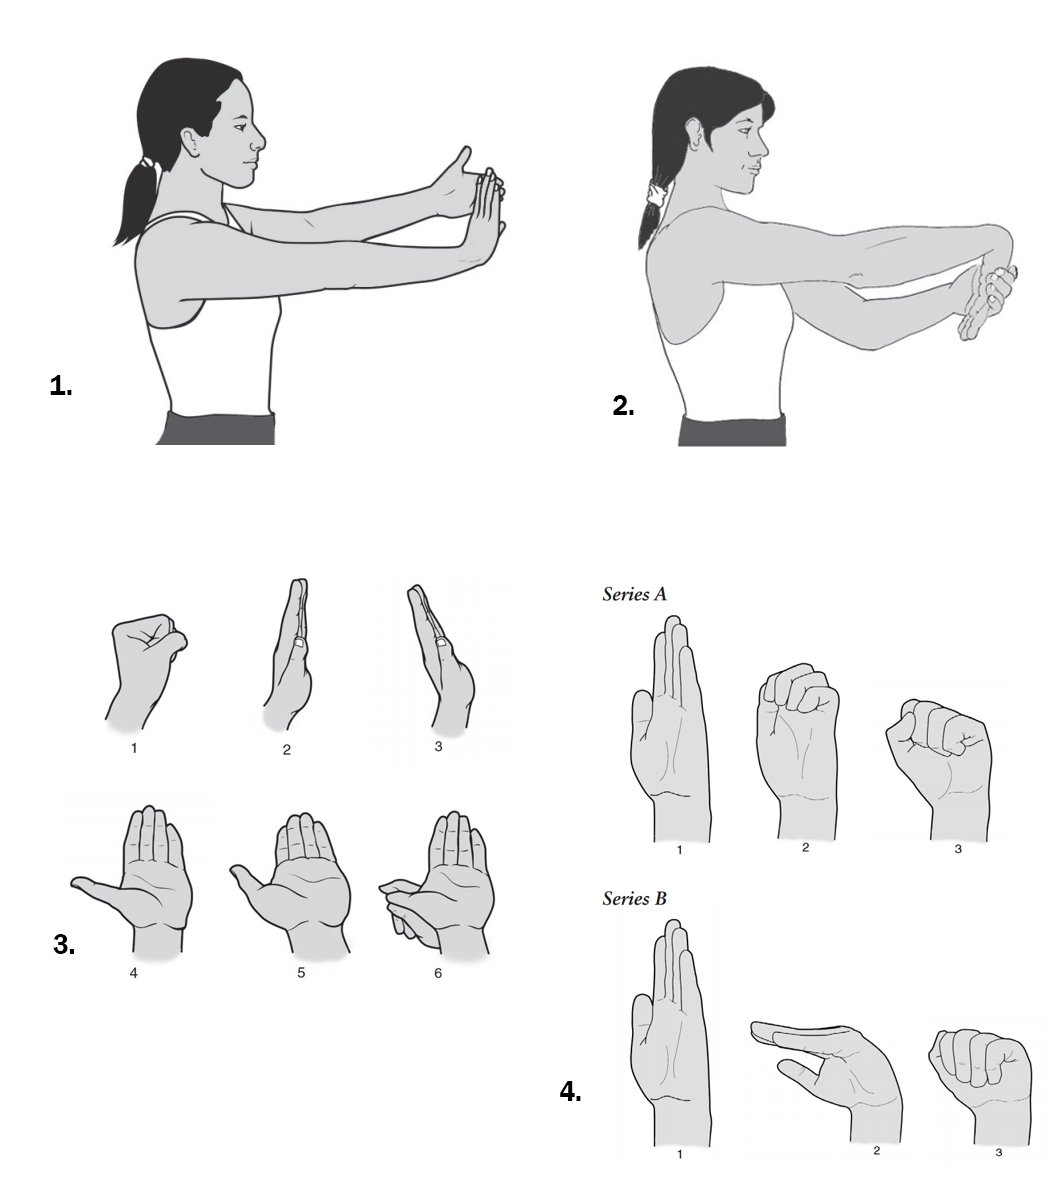 Carpal Tunnel Syndrome Rehab Exercises